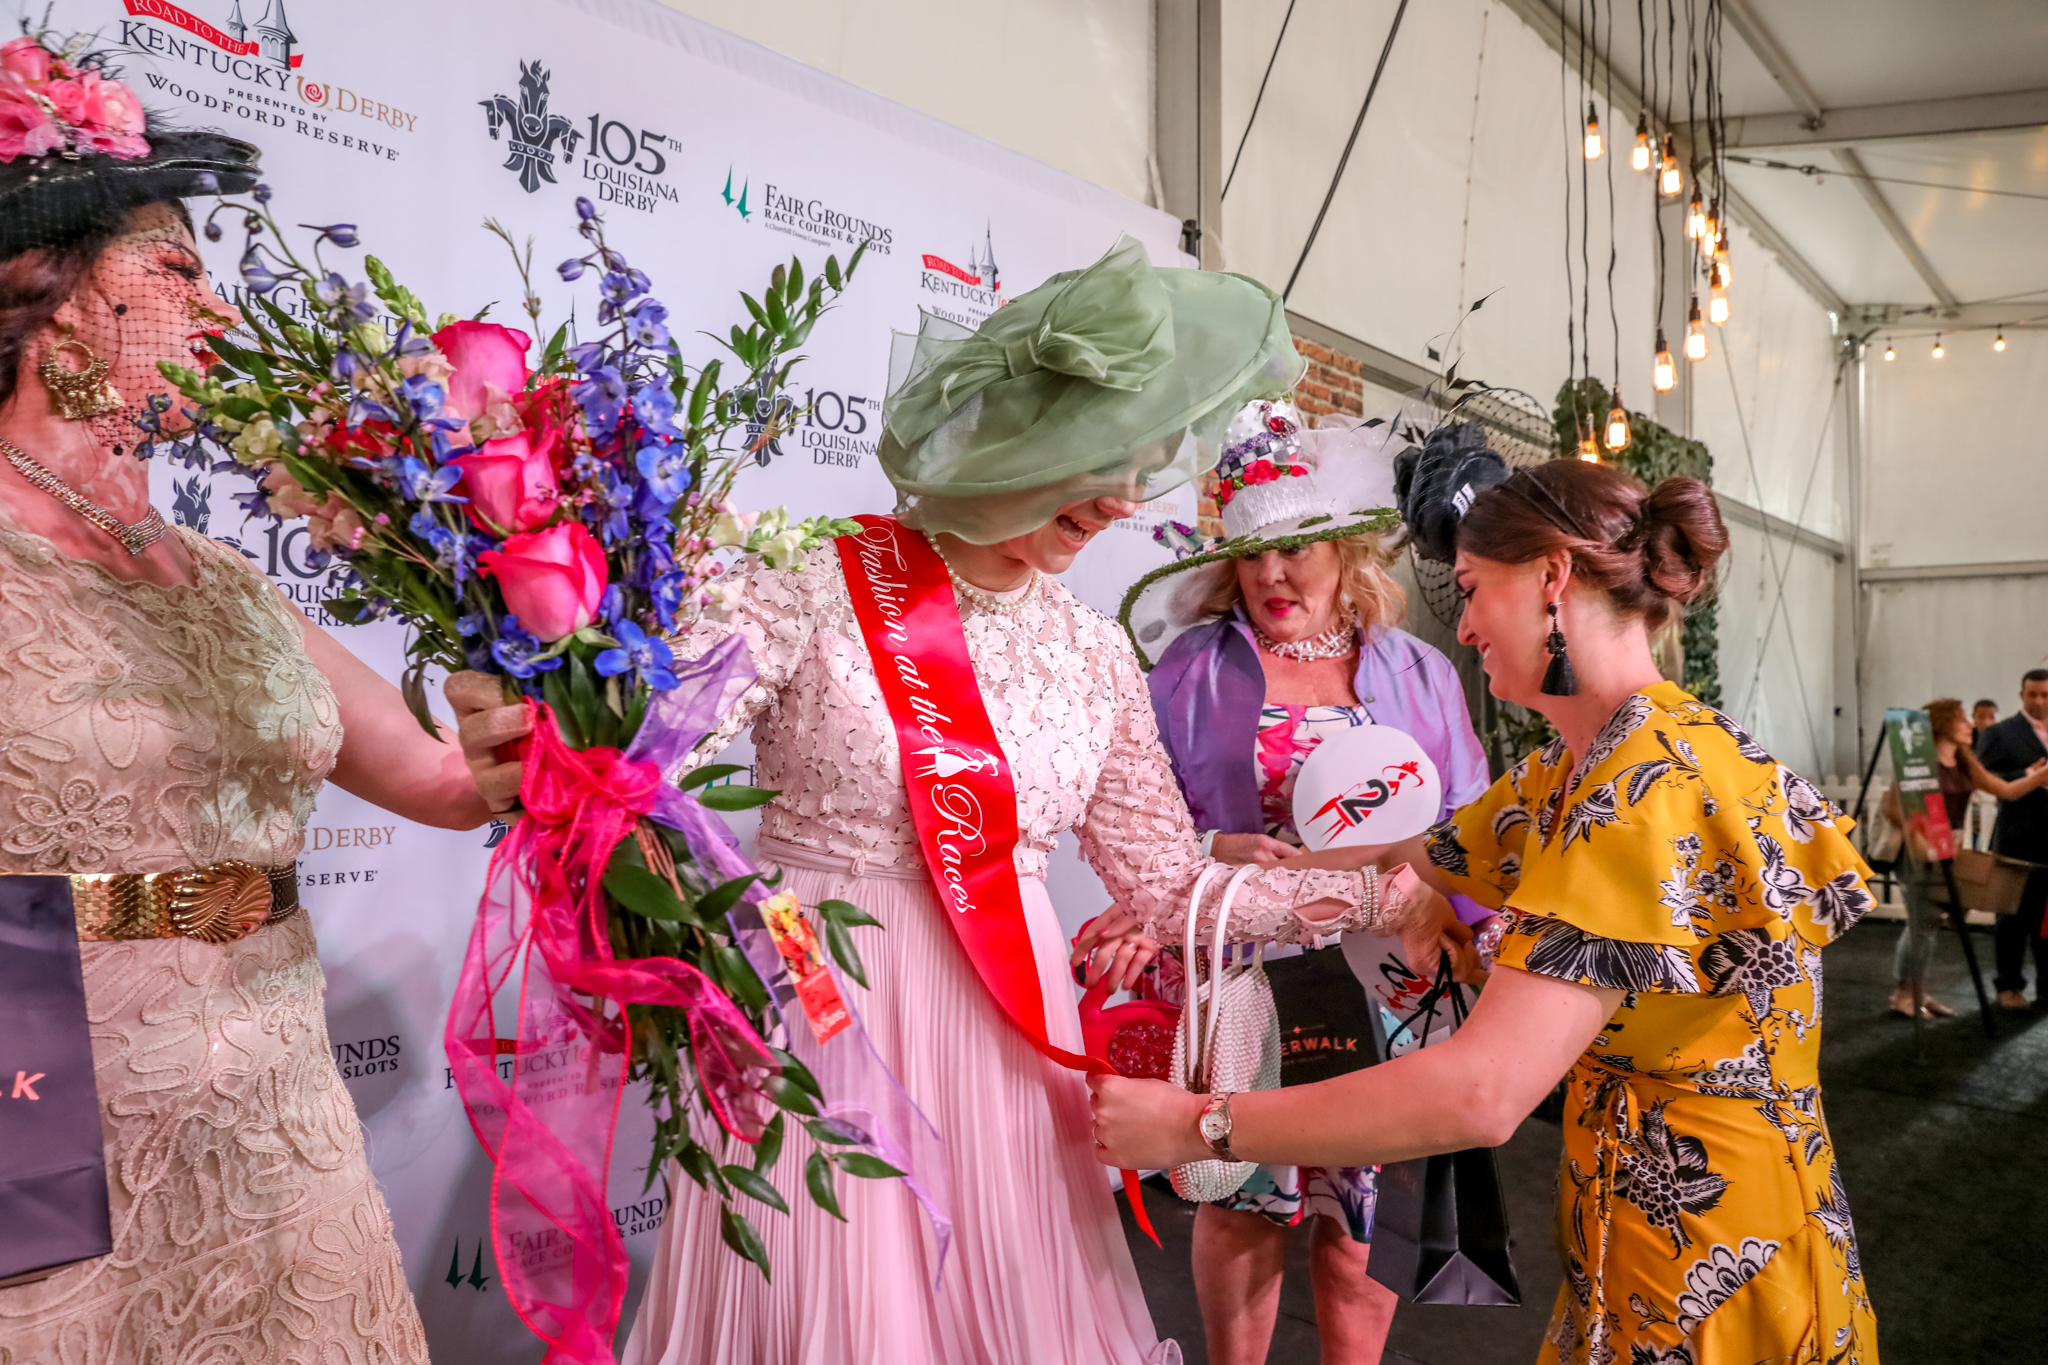 Fashion at the Races Louisiana Derby 2018 (123)